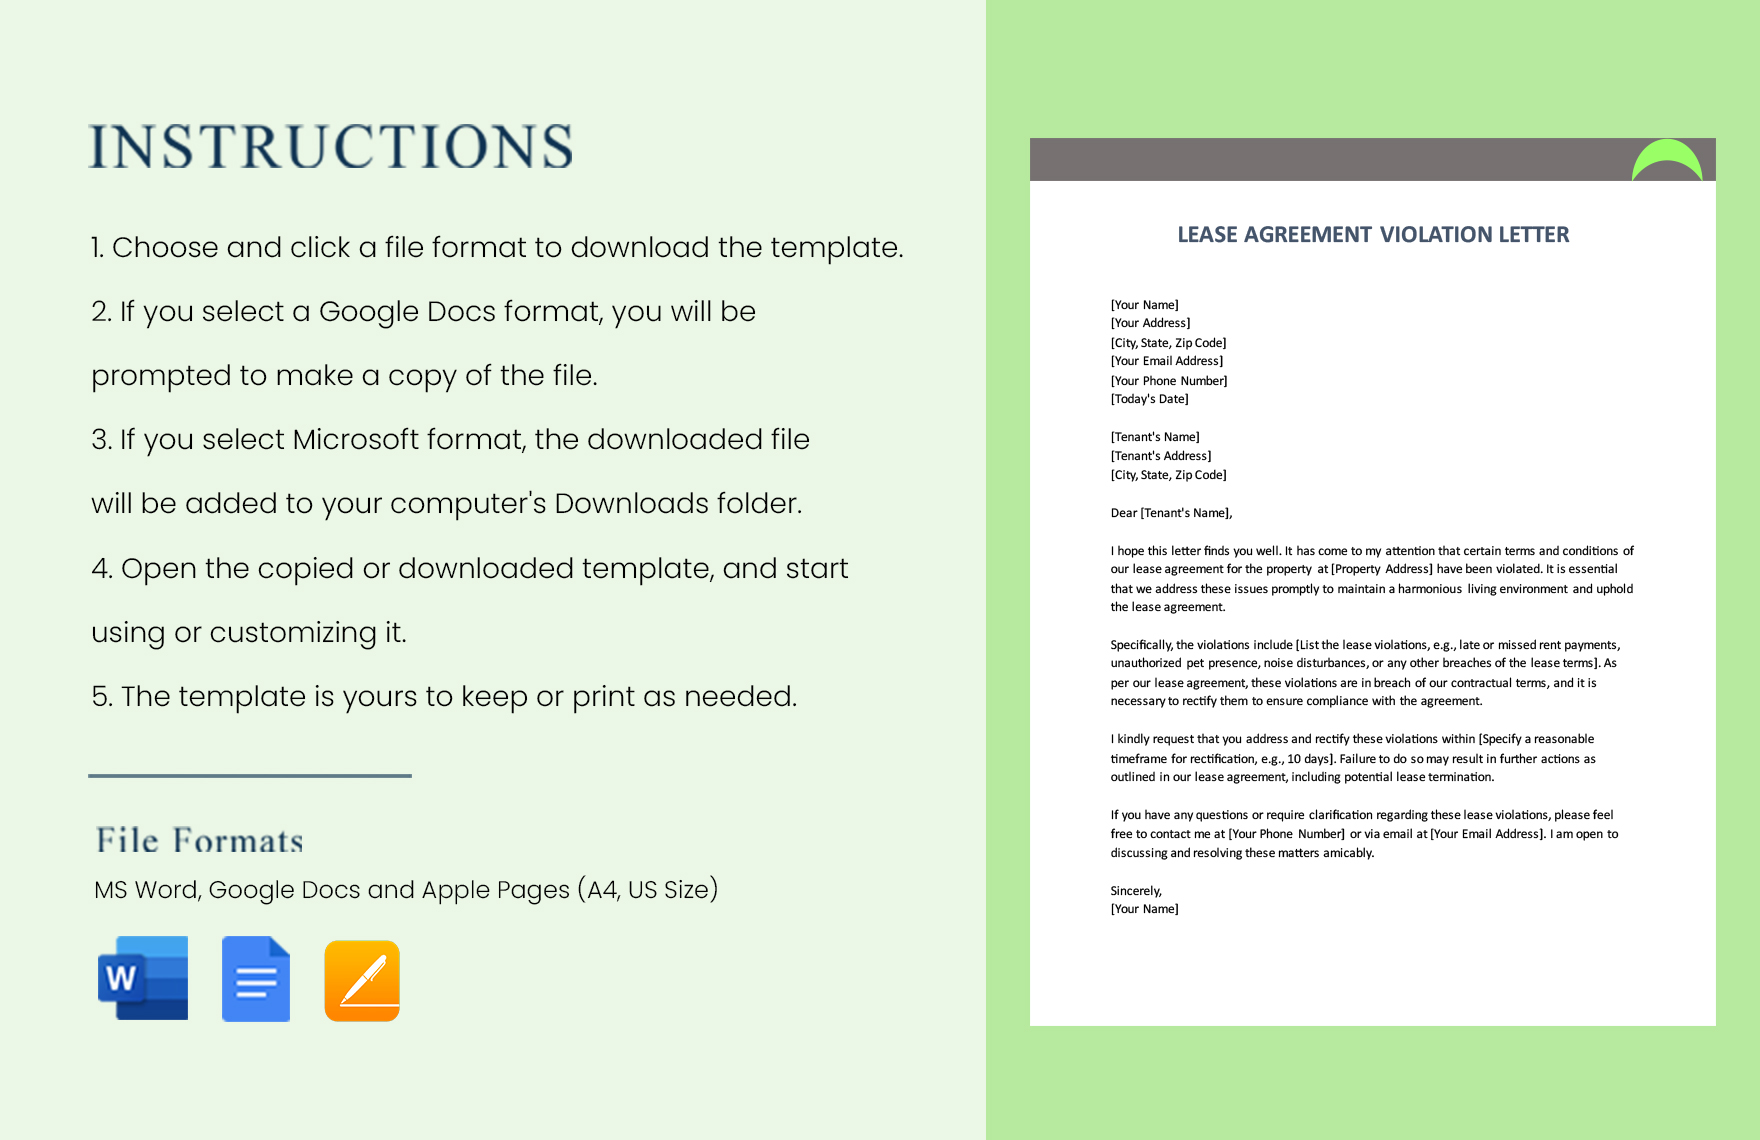 Lease Agreement Violation Letter